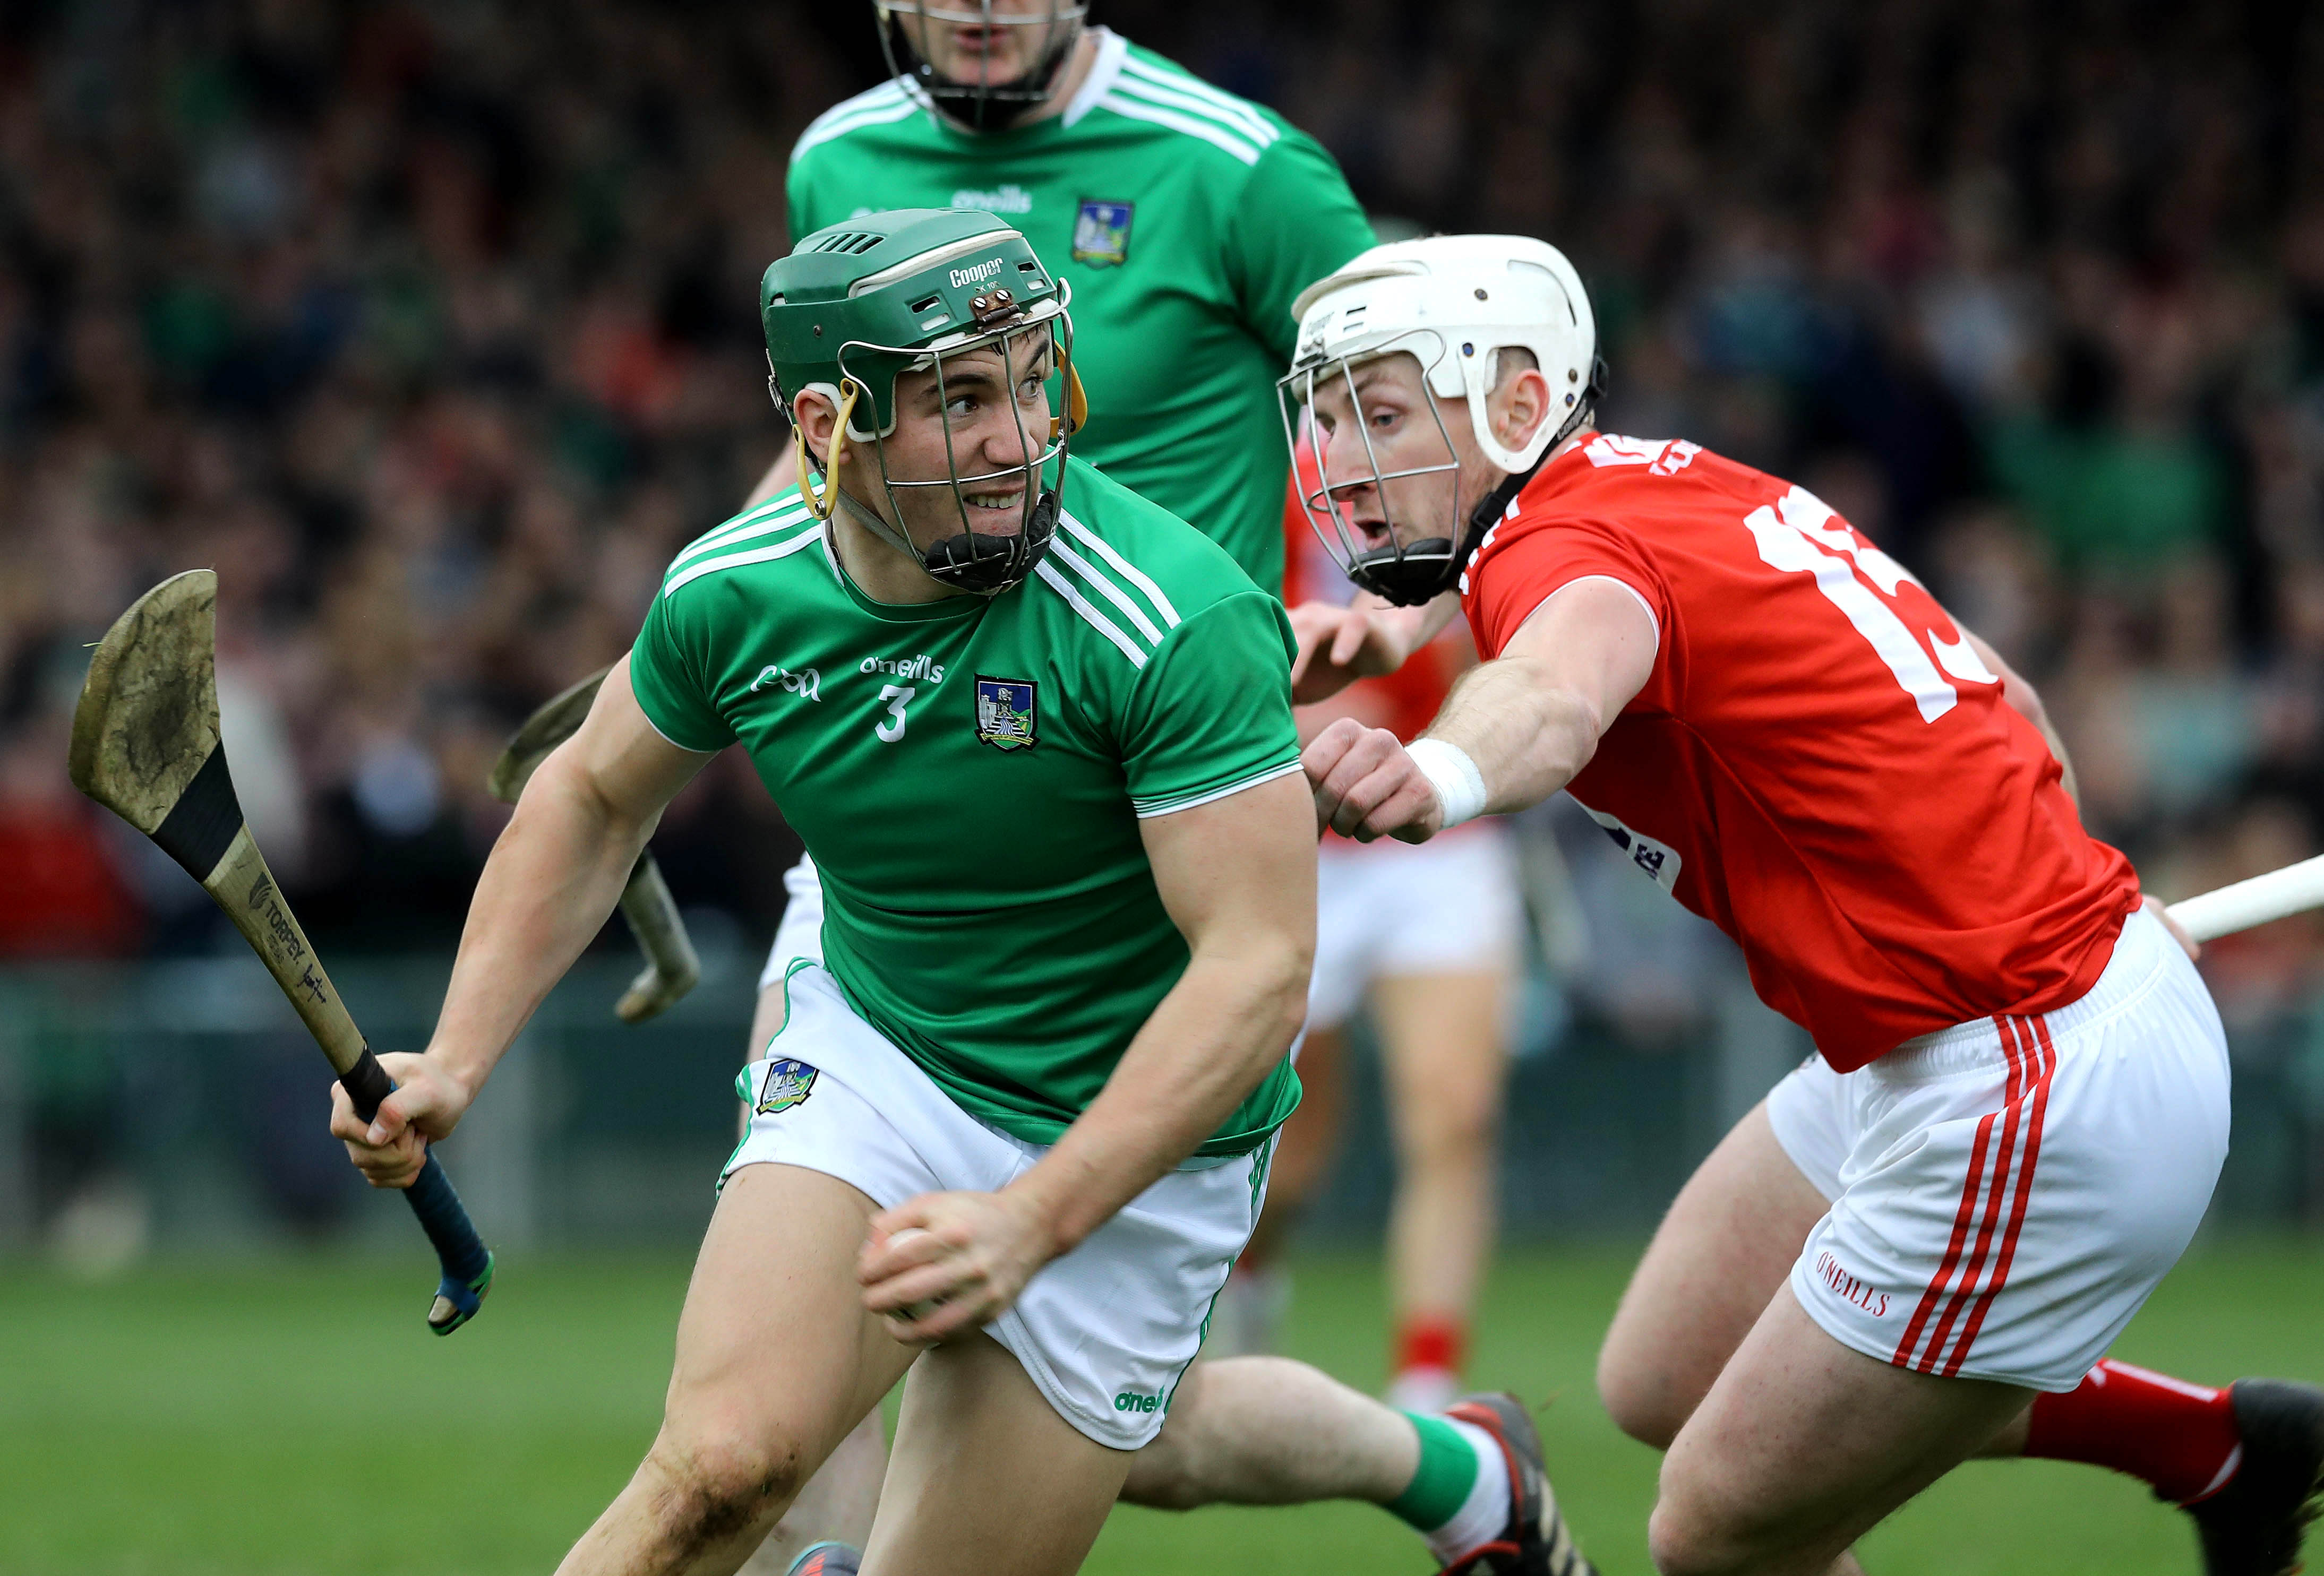 Limerick's McGrath Cup & Munster Hurling League finals to be streamed